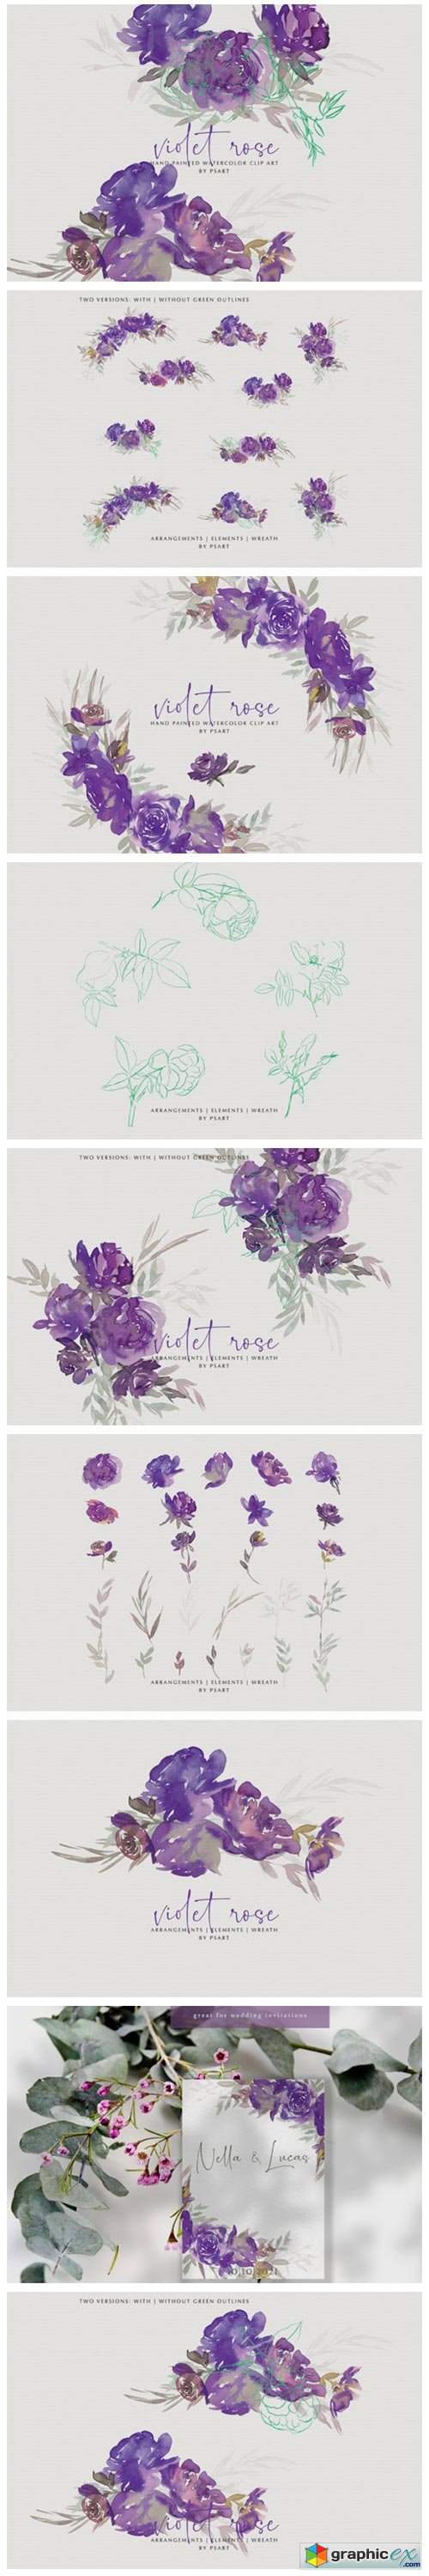 Watercolor Violet Rose Clipart Collection